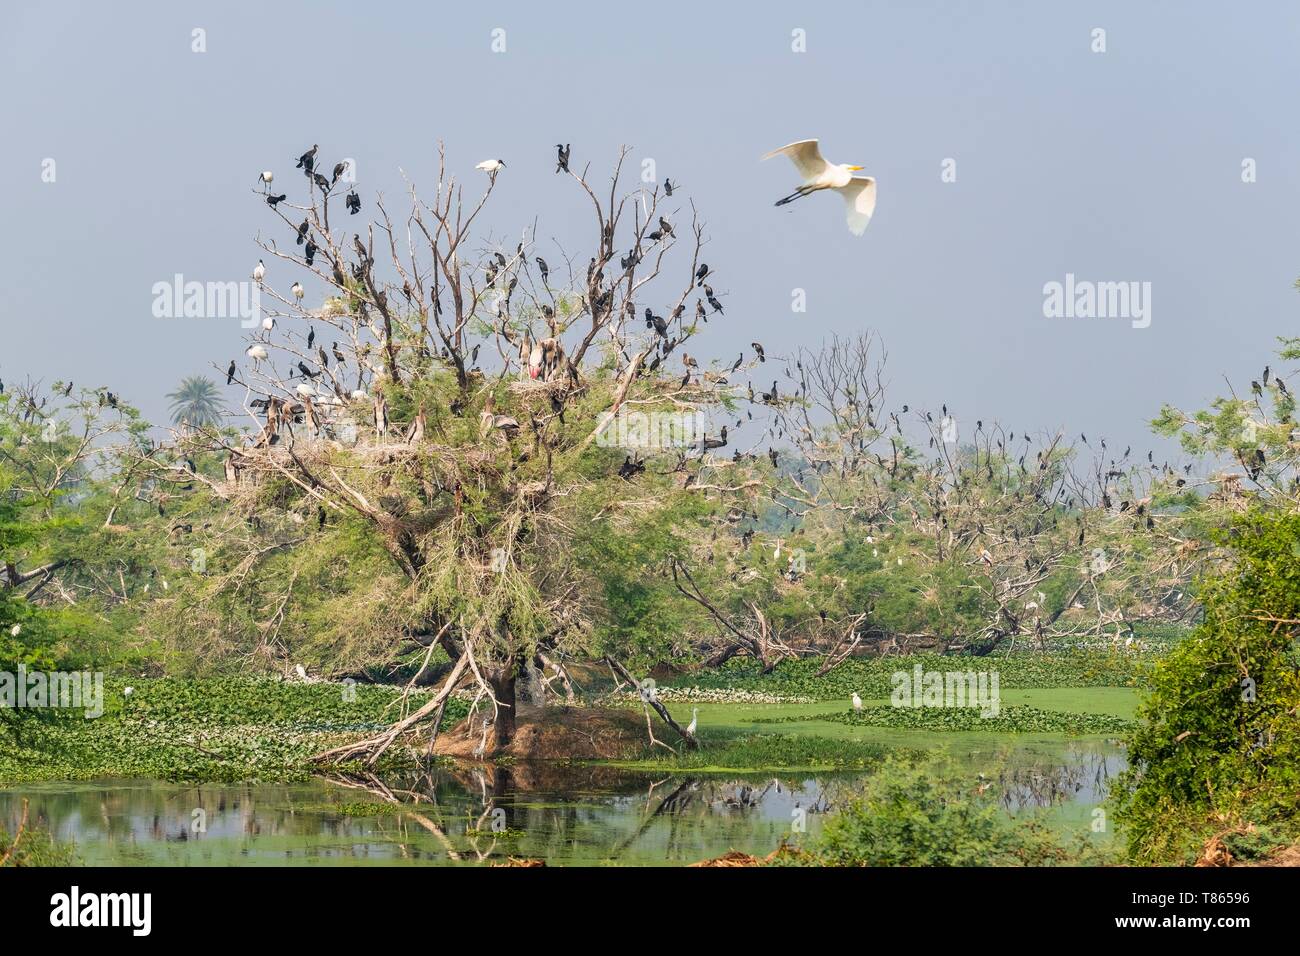 India, Rajasthan, Bharatpur, Keoladeo National Park (or Keoladeo Ghana National Park), a UNESCO World Heritage Site, is home to about 230 bird species Stock Photo